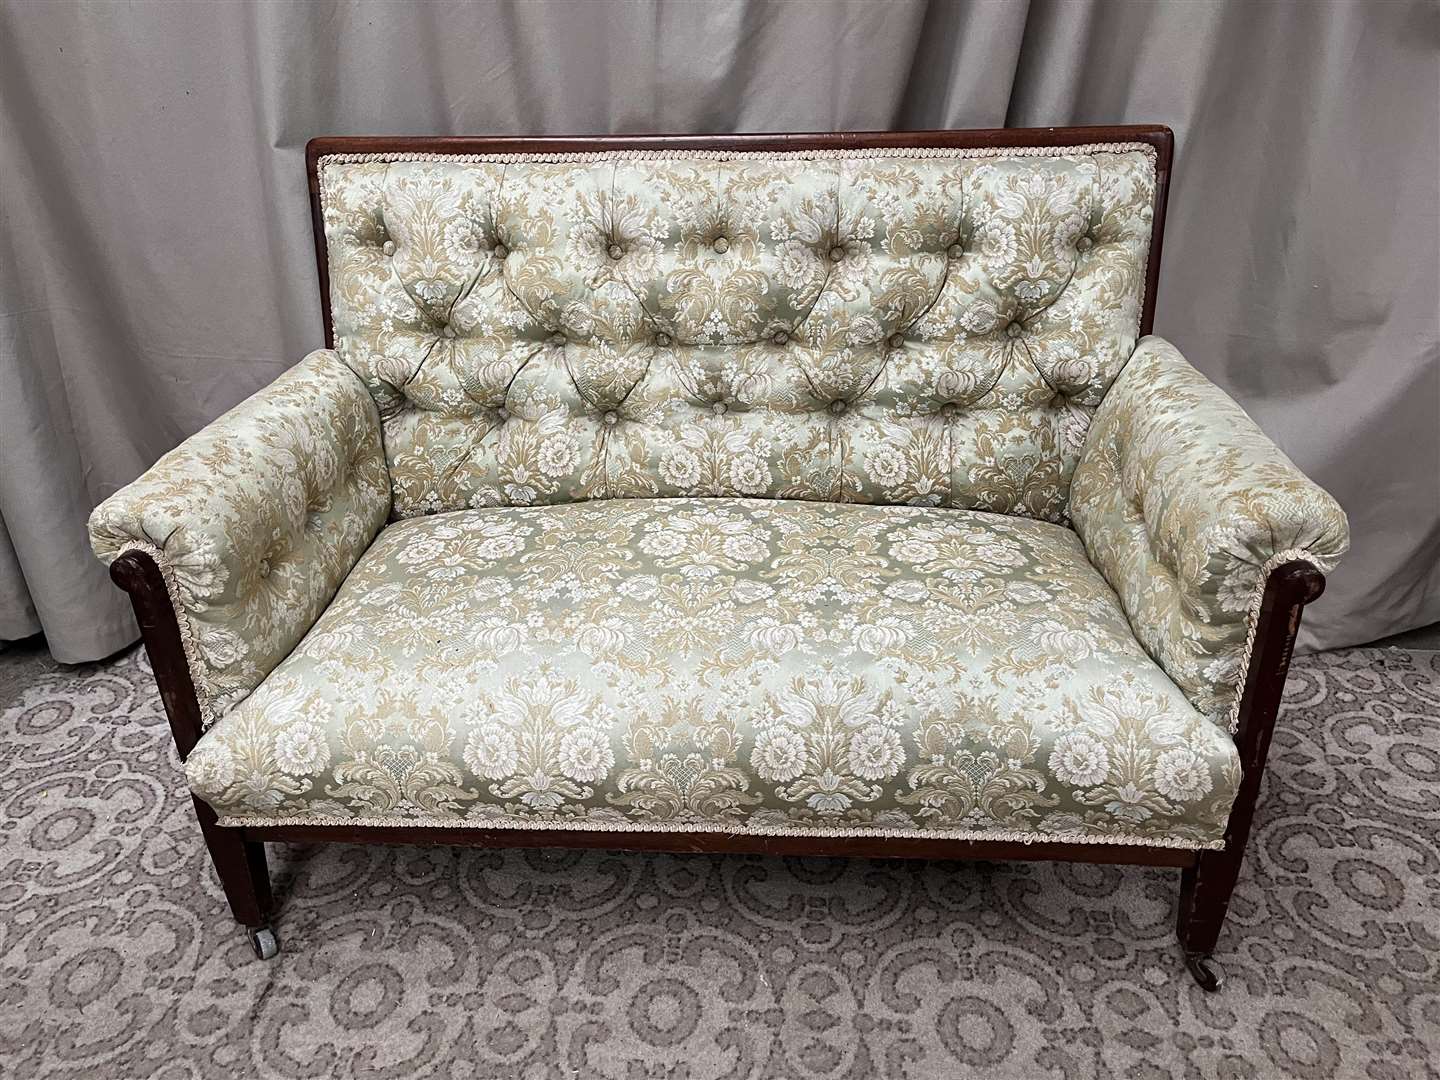 A deep-buttoned two seater settee as seen in the television series Normal People (Niall Mullen/PA)